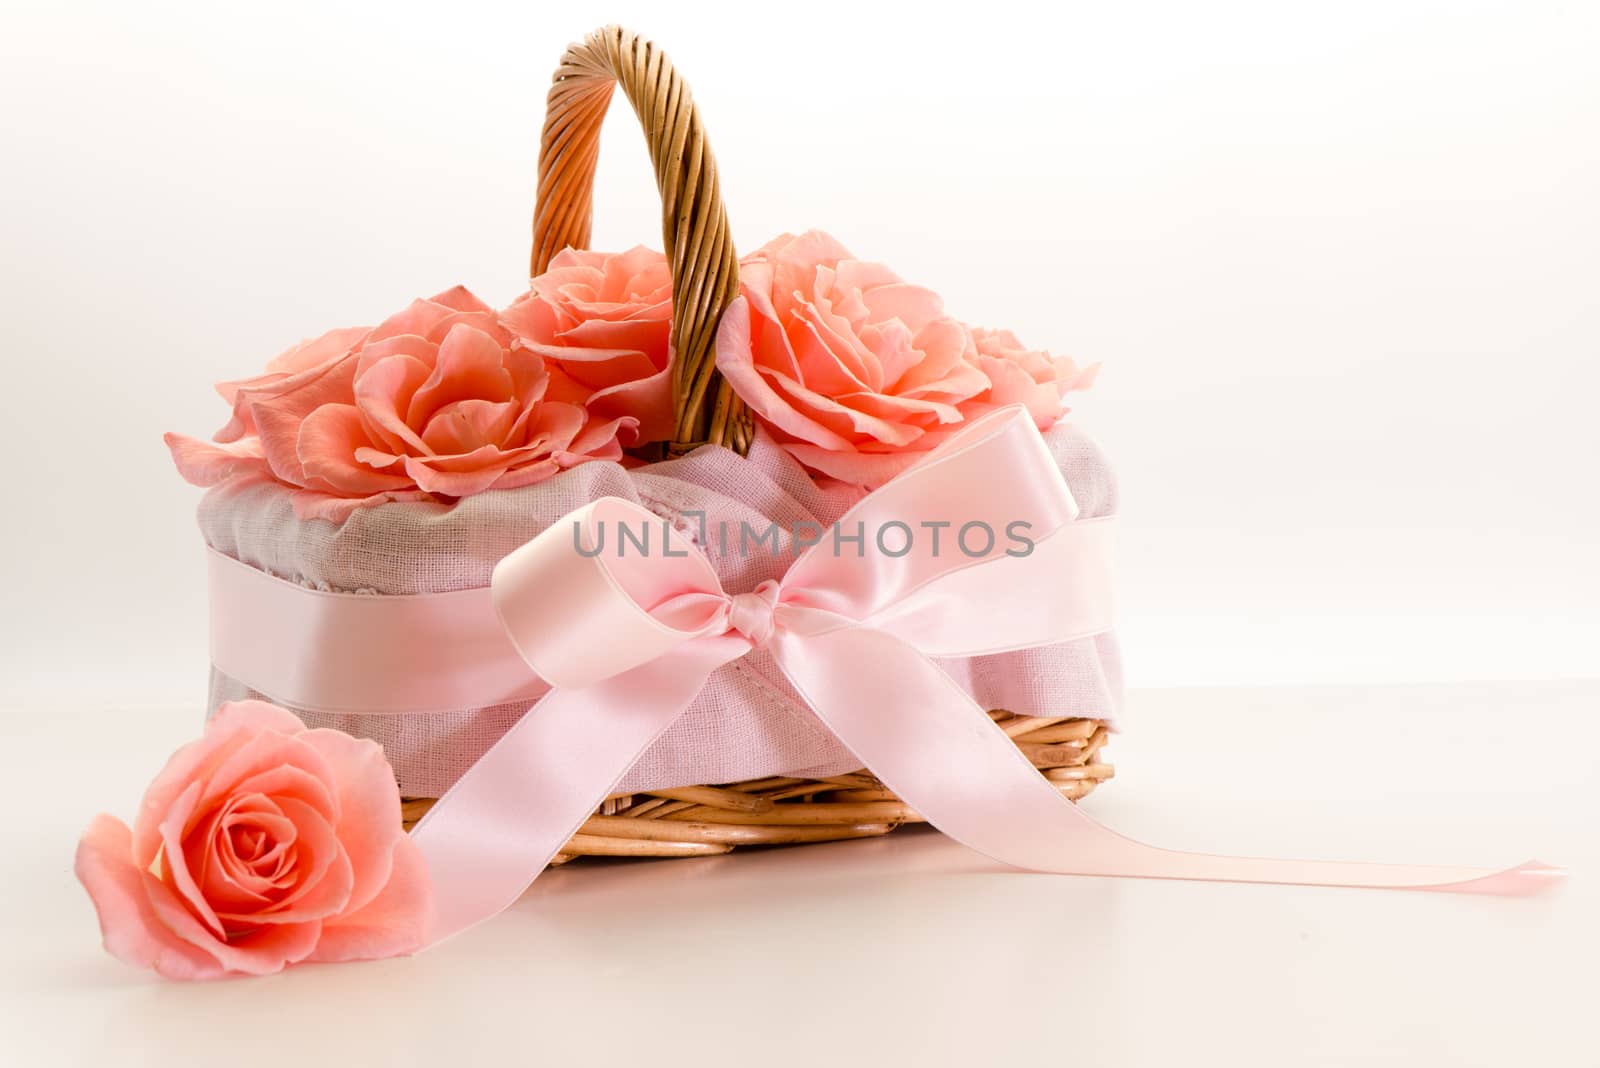 Basket with roses by p.studio66